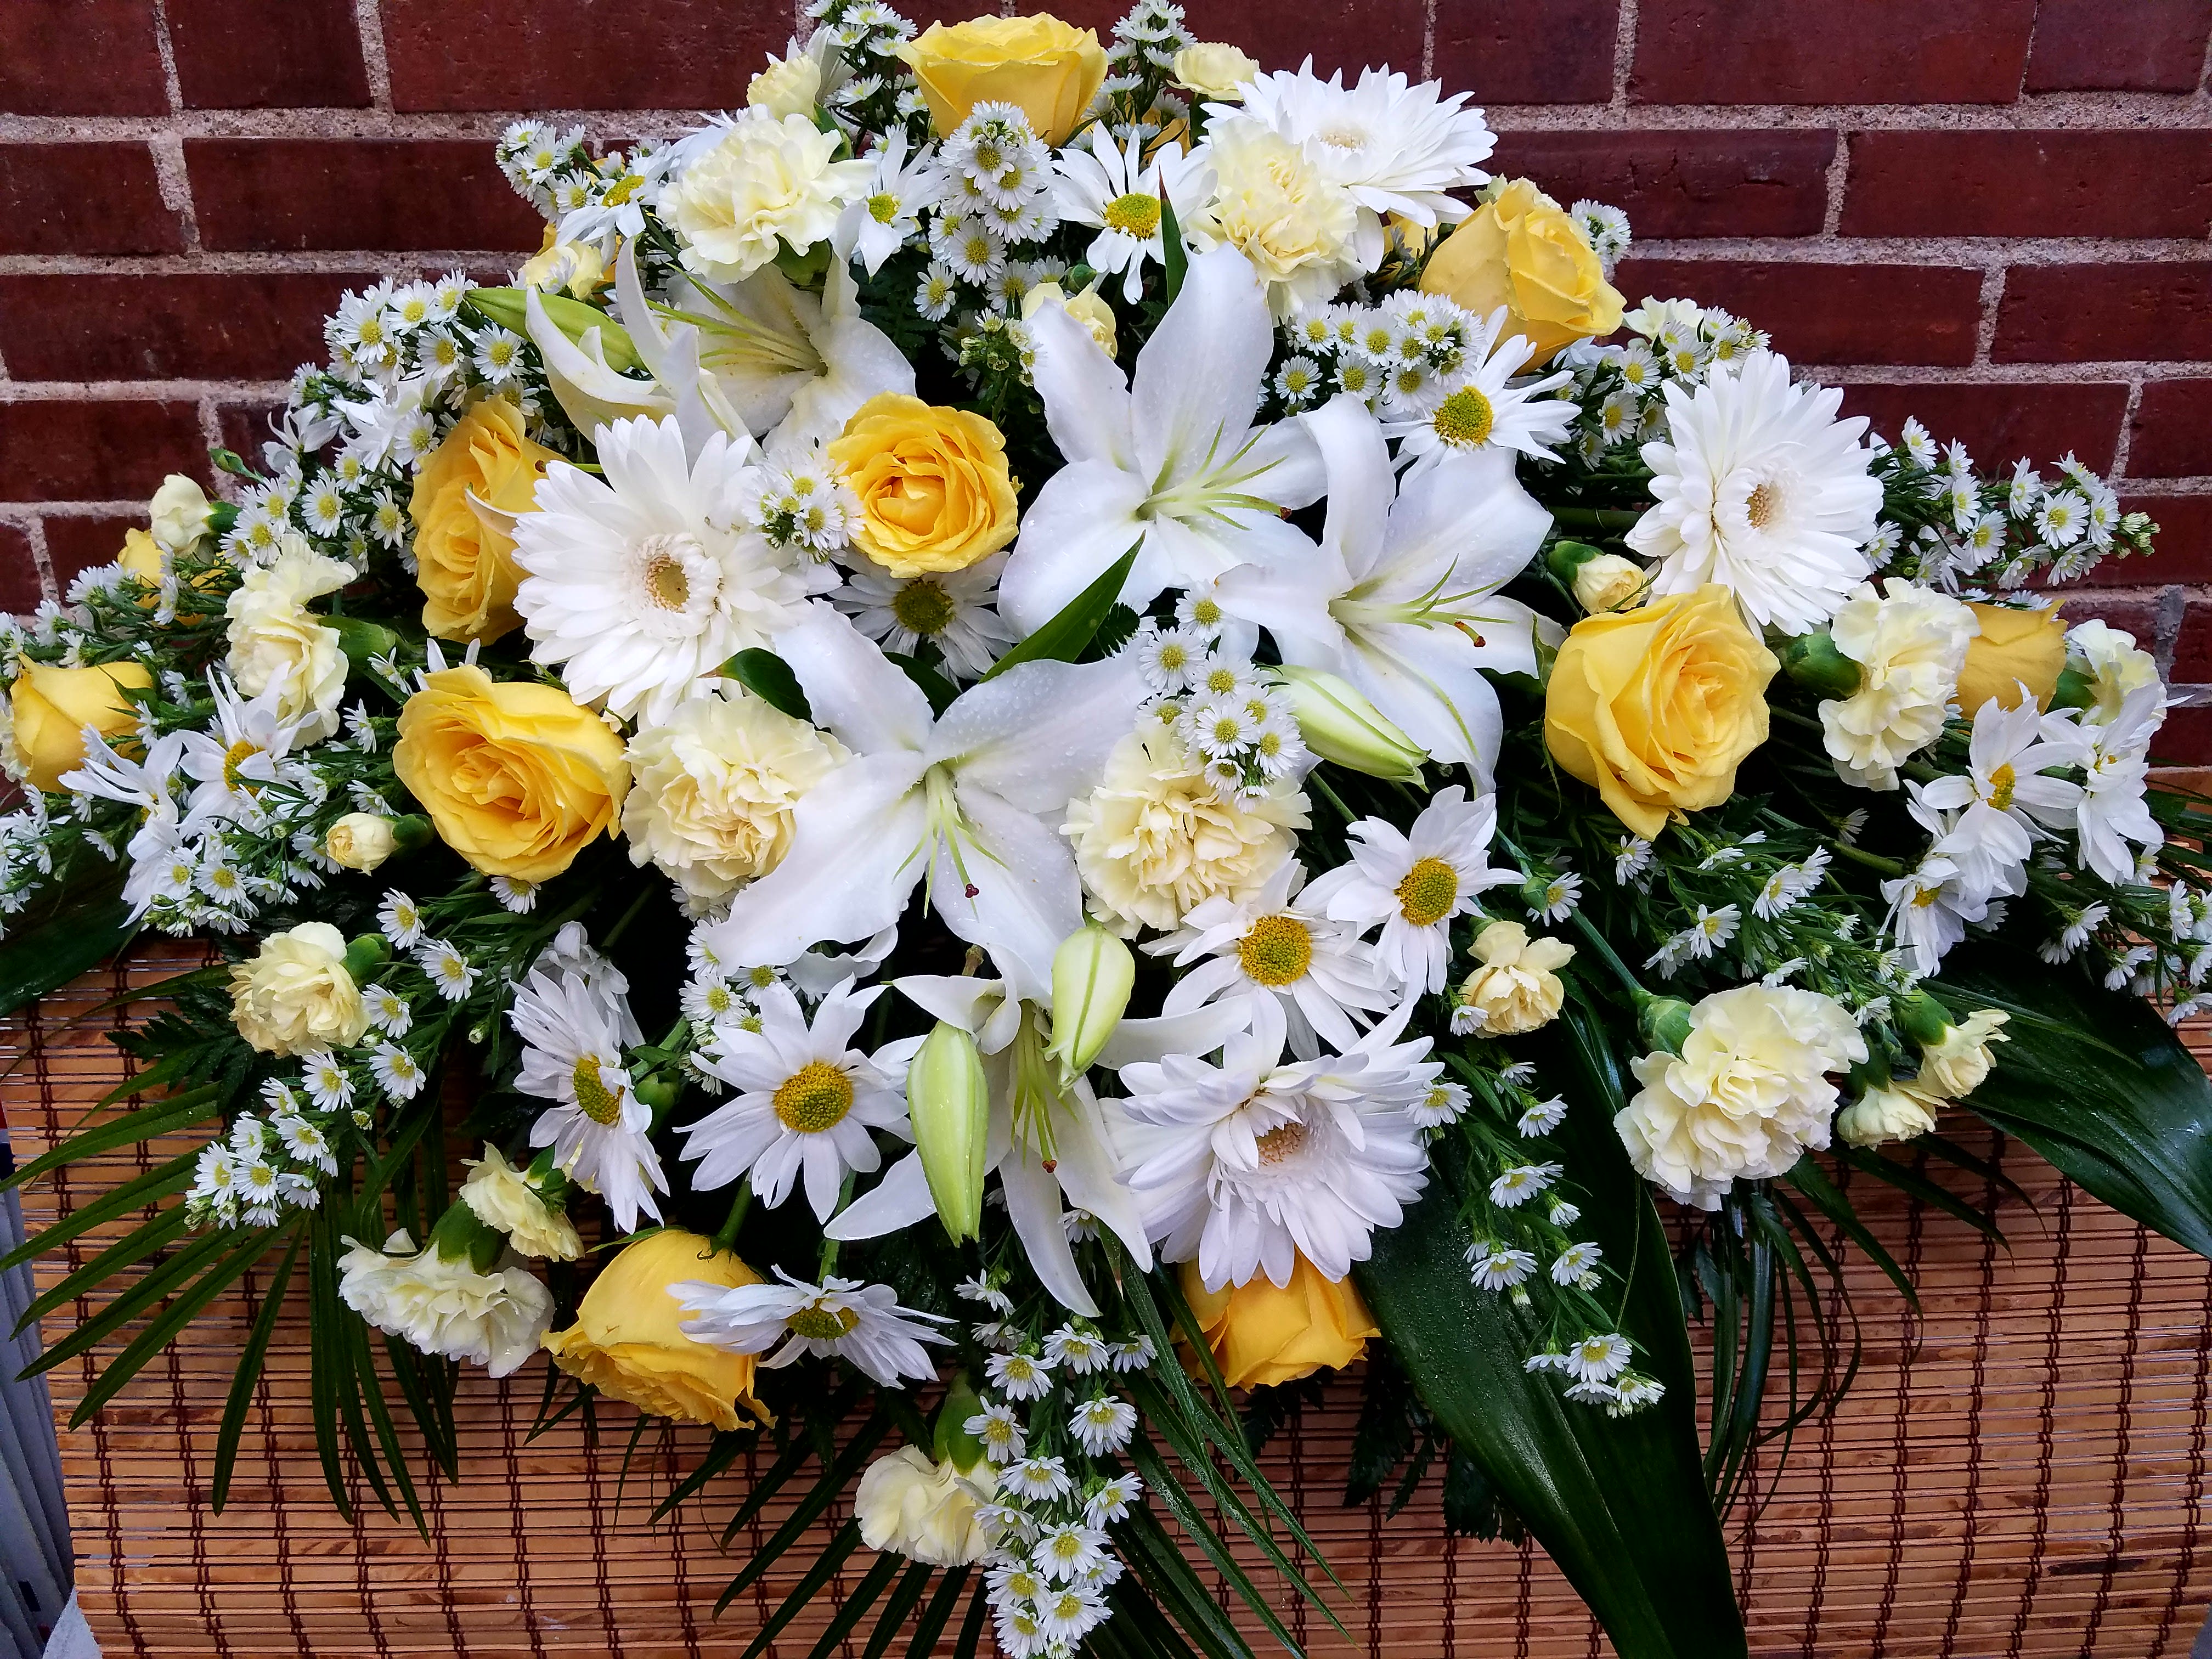 Eckert Florist's Yellow And White Casket Spray - This casket adornment features our finest yellow and white flowers available. Flowers may include white lilies, white gerbera daisies, white chrysanthemum daisies, yellow roses and yellow carnations. Filler flower and foliage will also be added.  